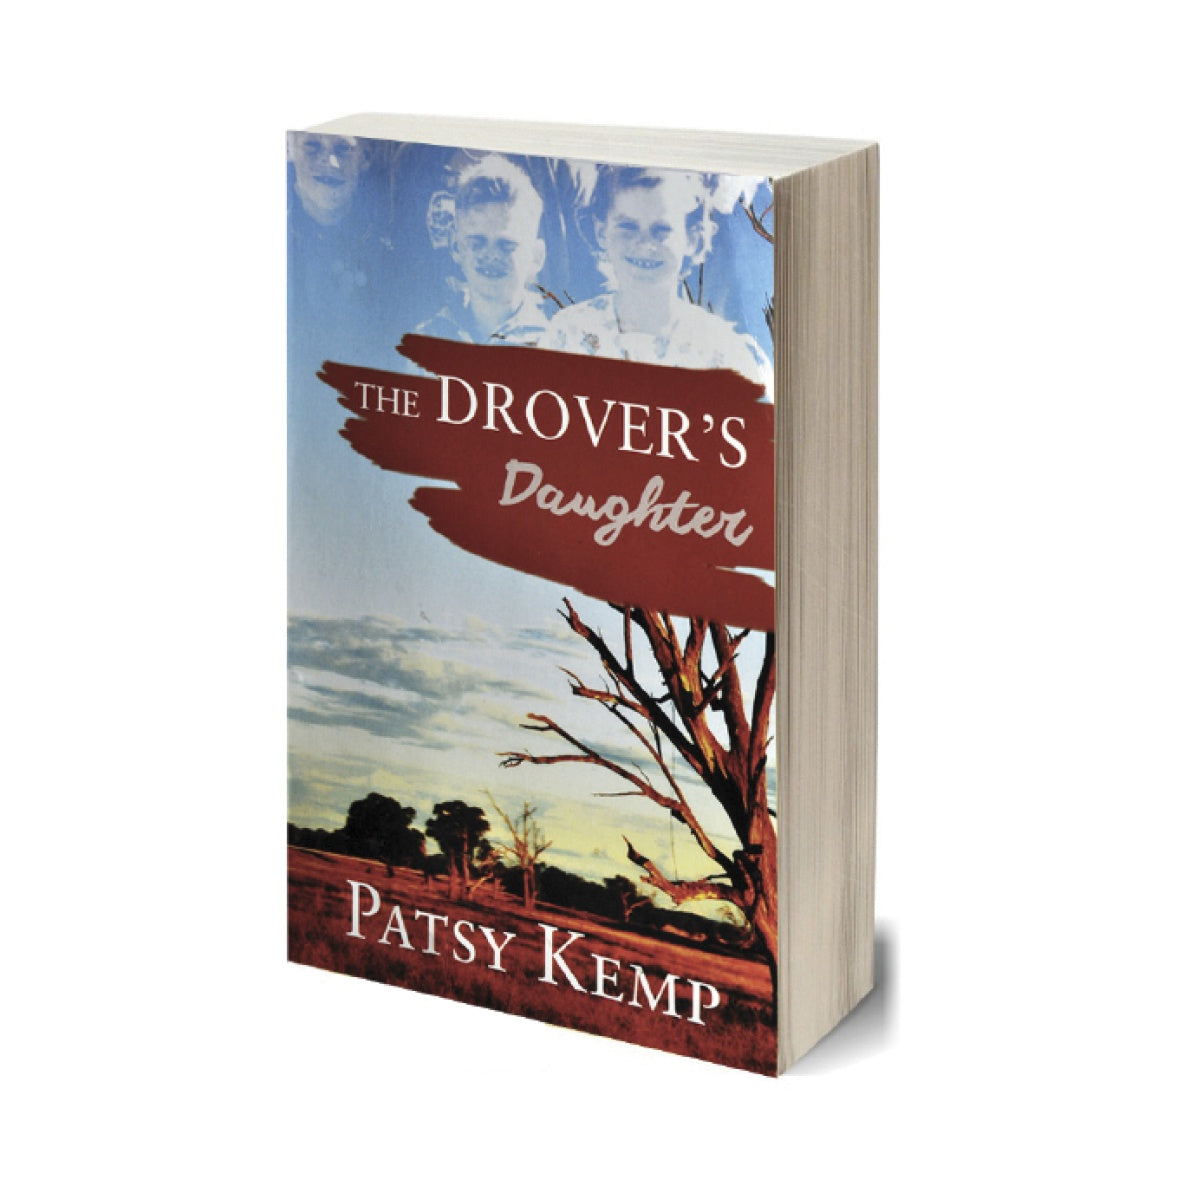 The Drover's Daughter book by Patsy Kemp